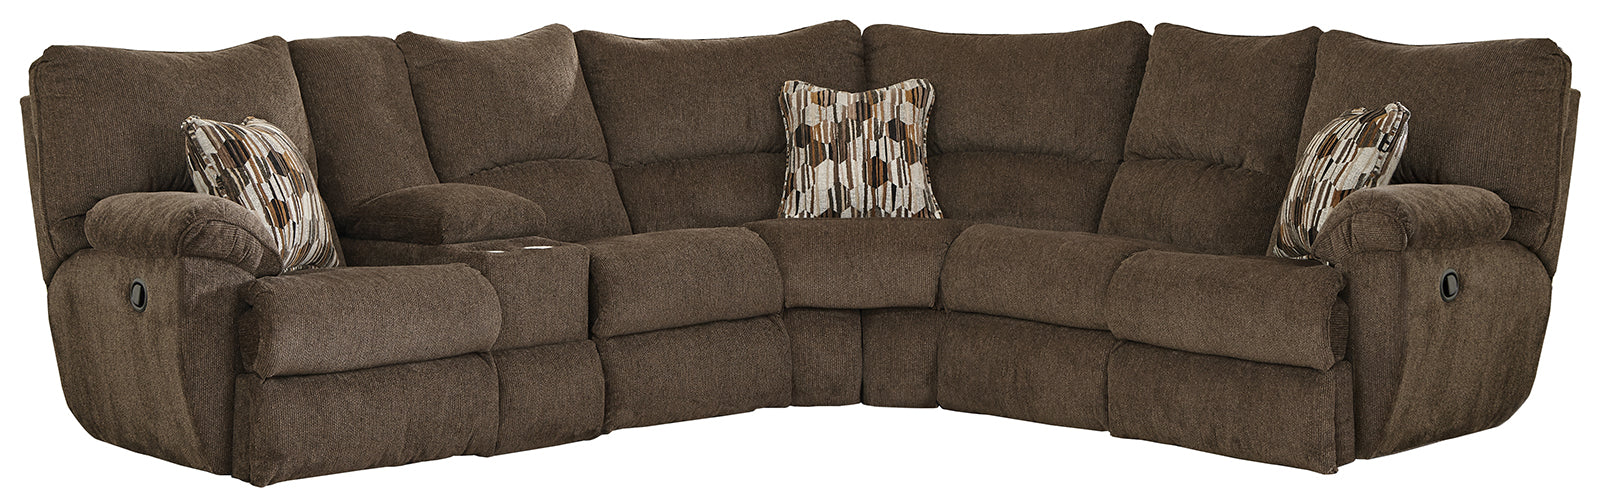 Catnapper Elliott 2pc Lay Flat Reclining Sectional in Chocolate image